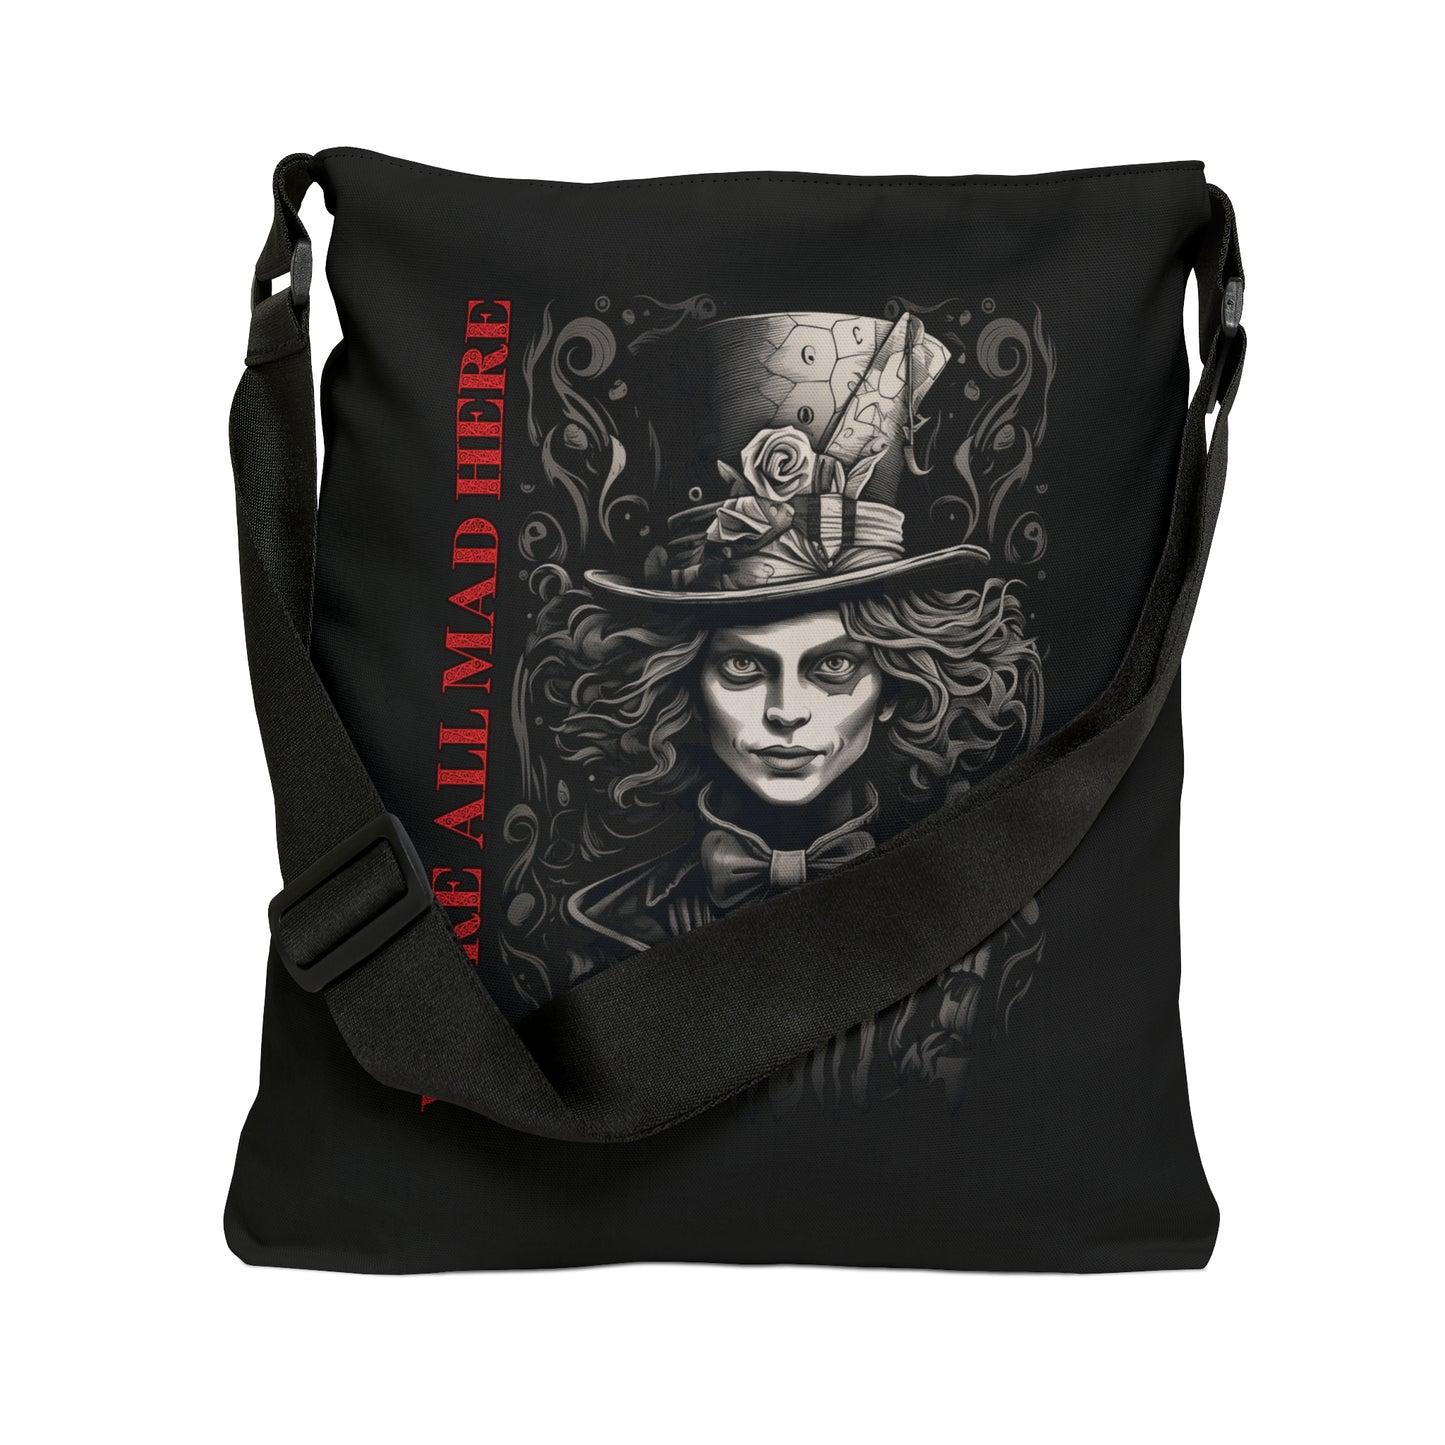 We're All Mad Here Signature Adjustable Tote Bag (AOP)